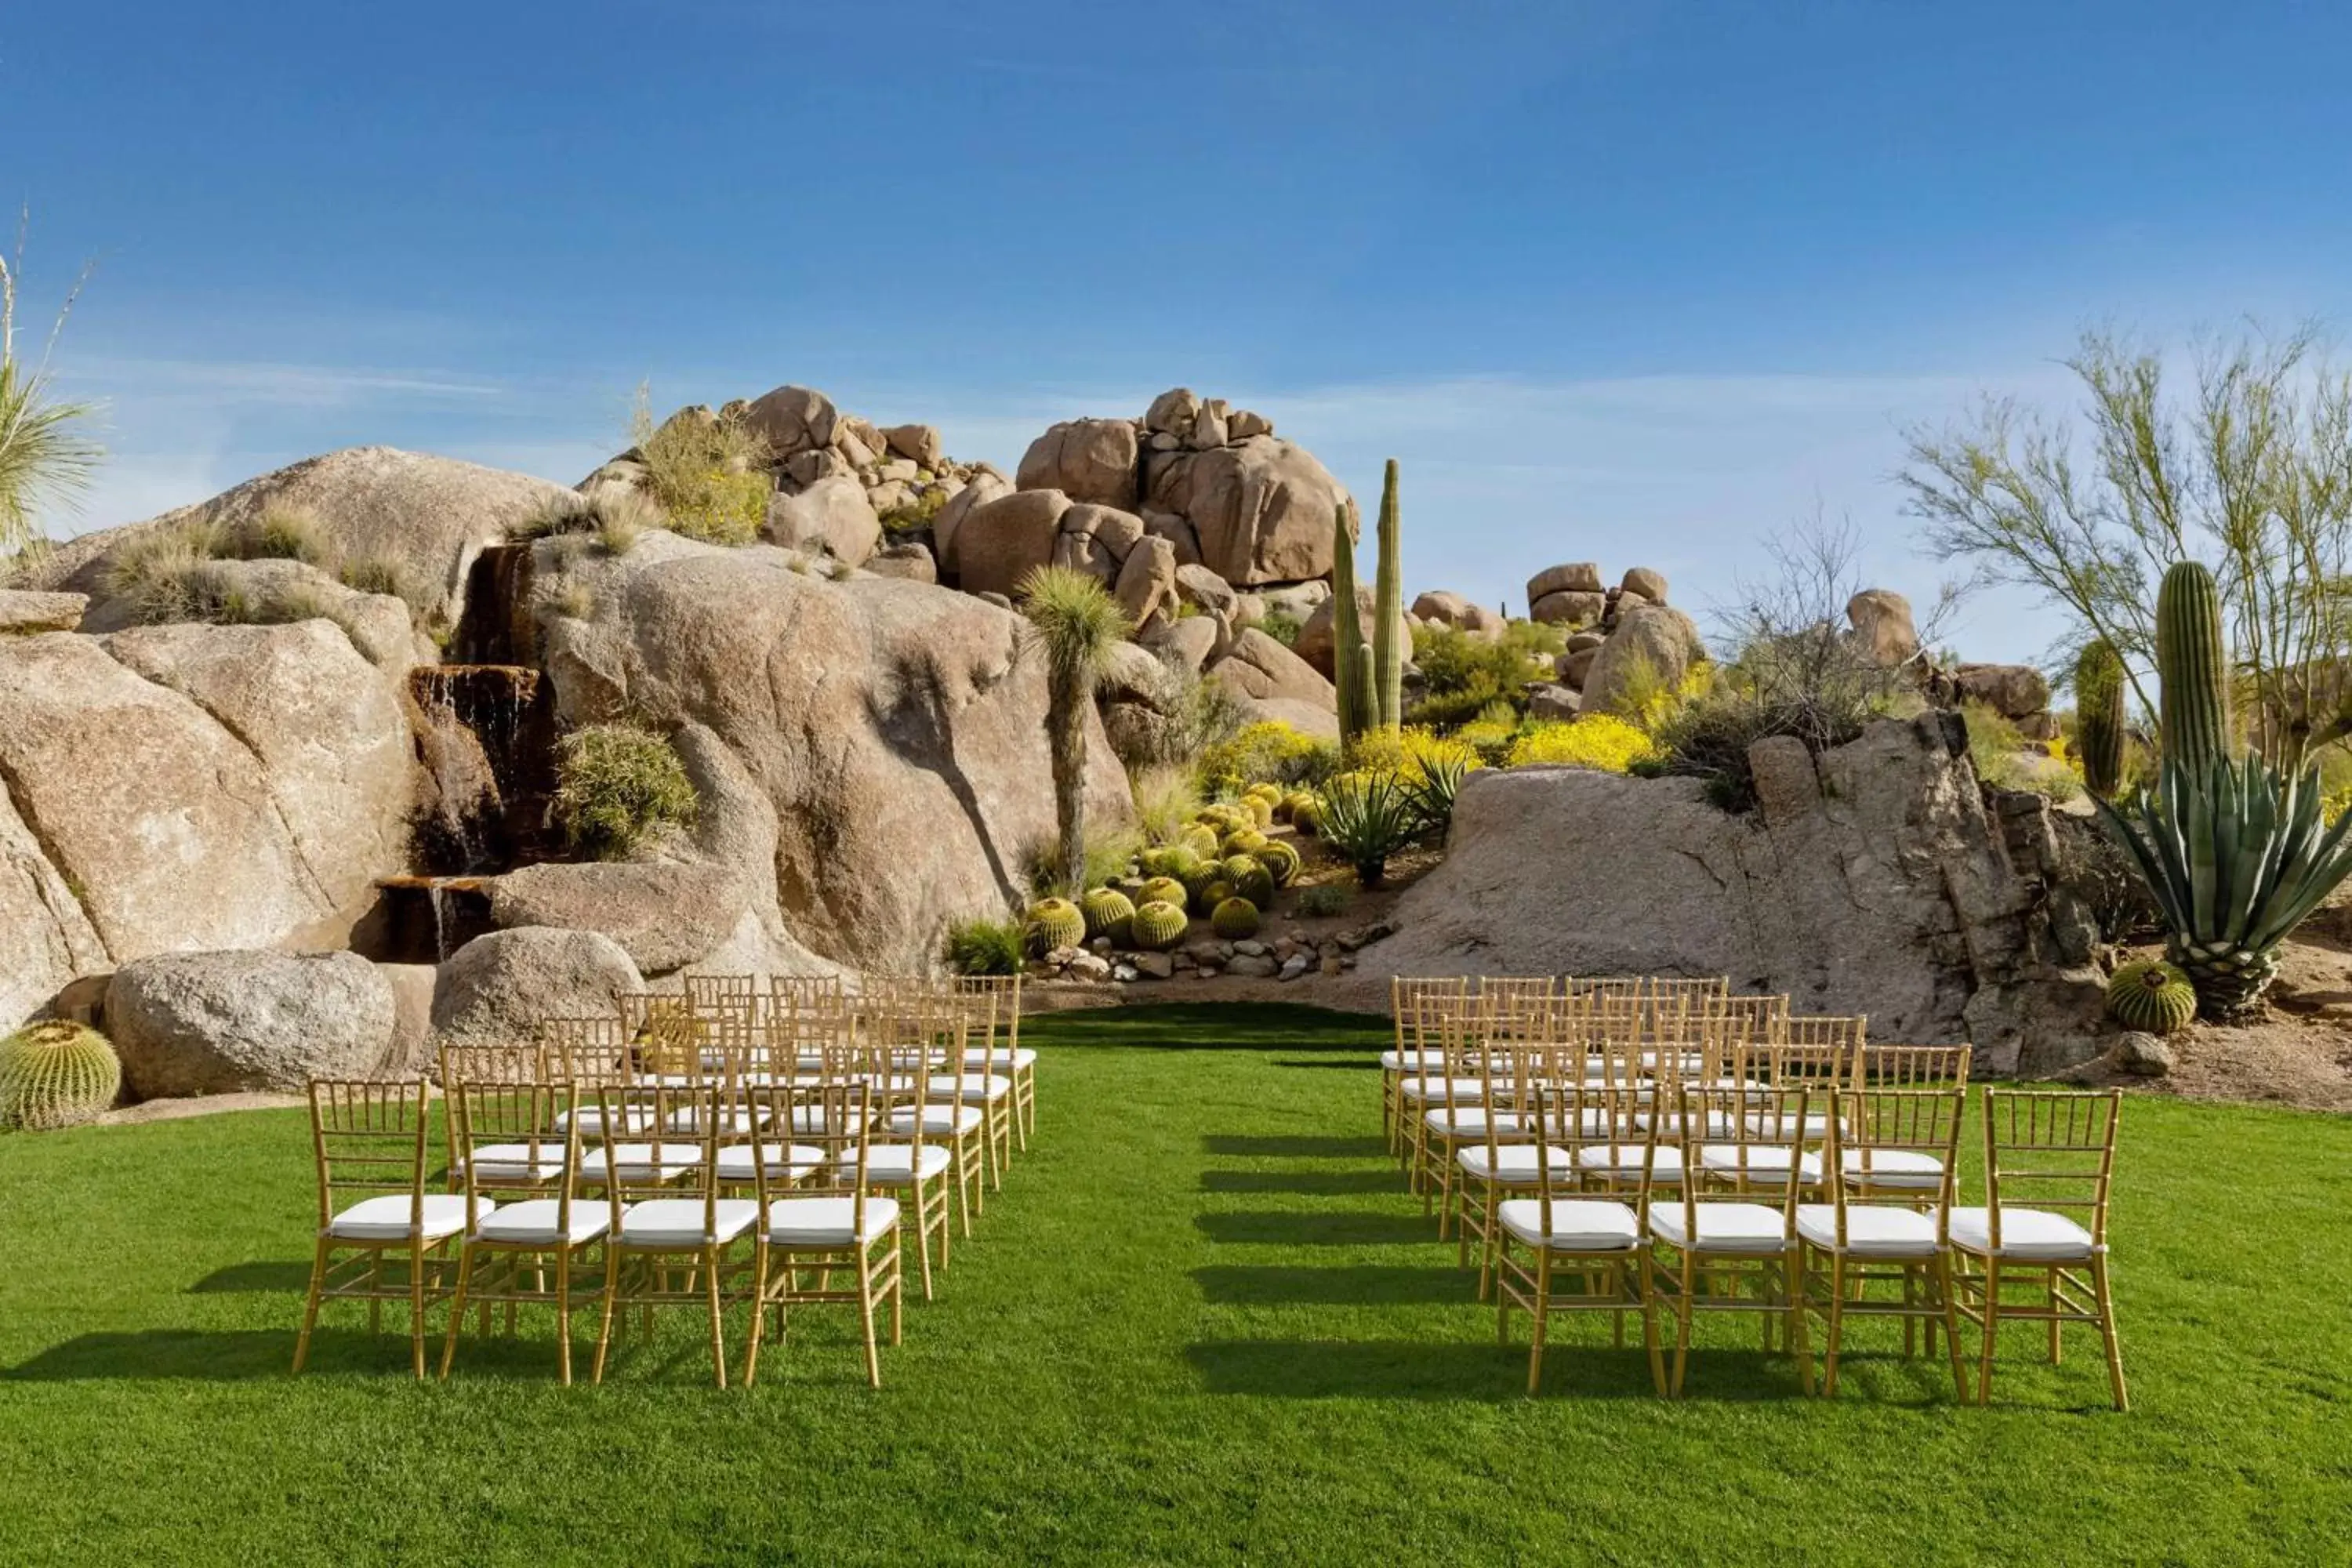 Meeting/conference room in Boulders Resort & Spa Scottsdale, Curio Collection by Hilton